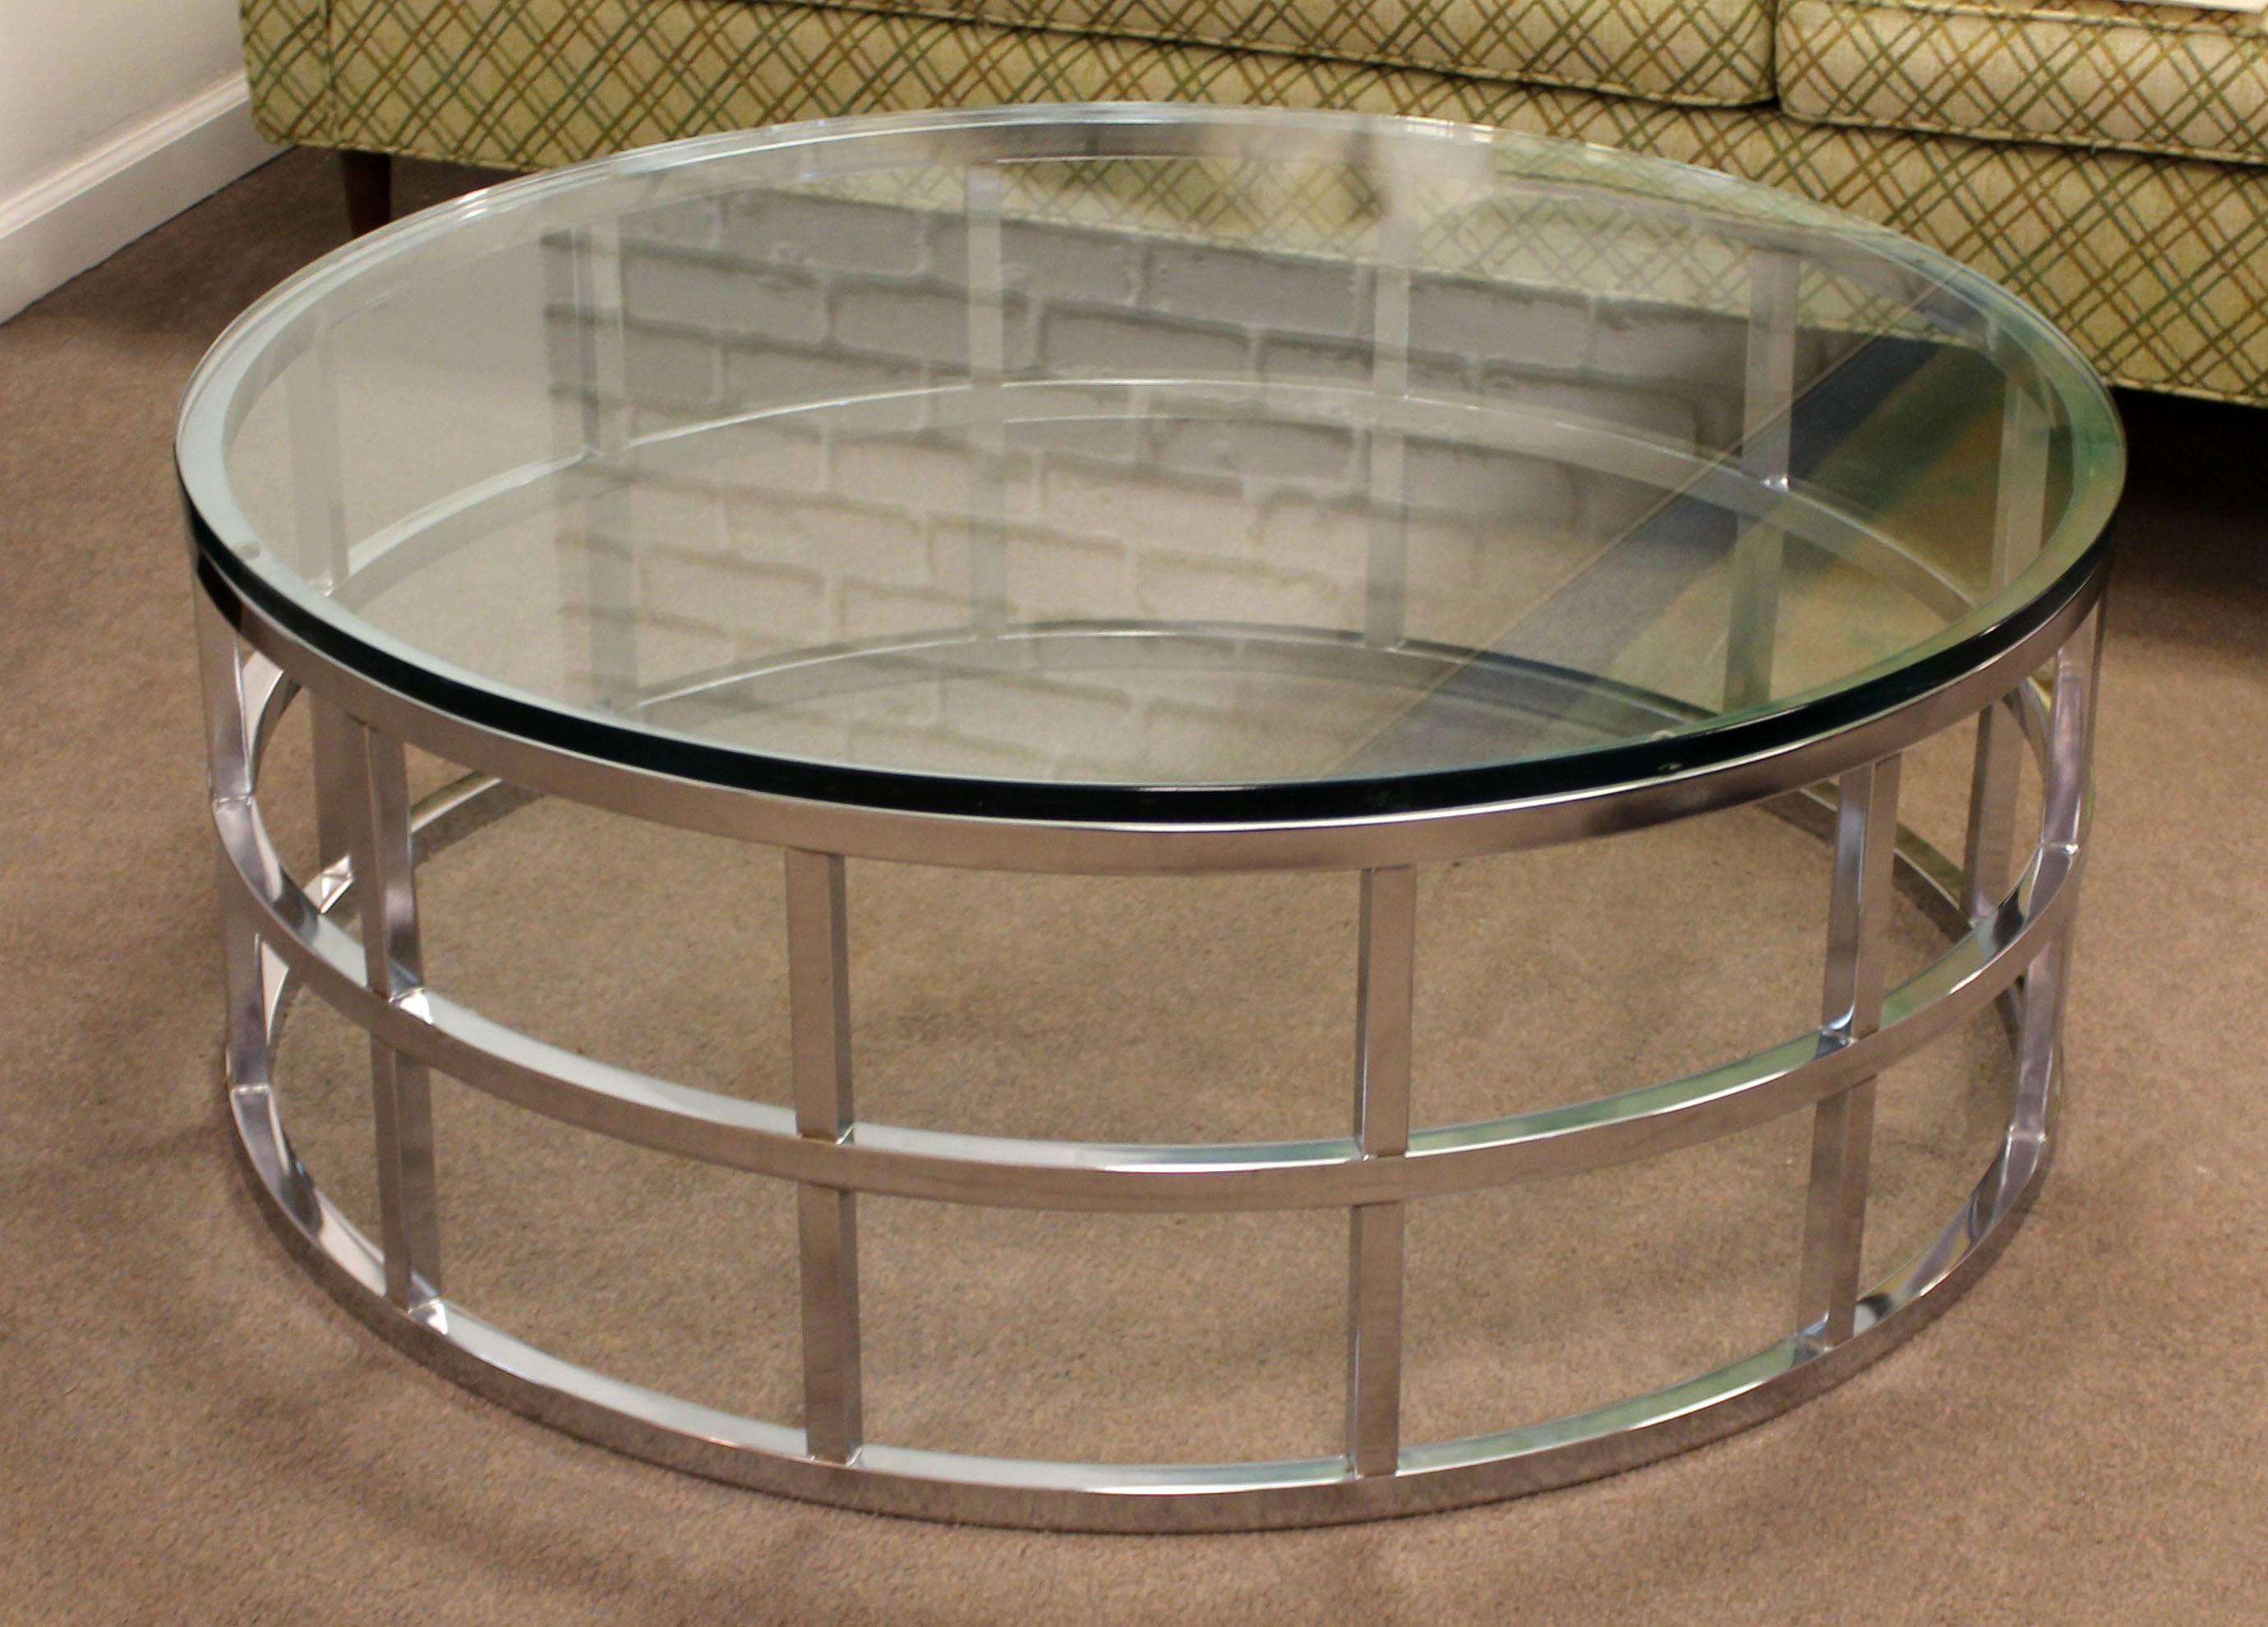 For your consideration is a simple and stunning, chrome and glass, circular coffee table, style of Milo Baughman for the Design Institute of America, circa the 1970s. In excellent condition. The dimensions are 42" Sq x 16" H.